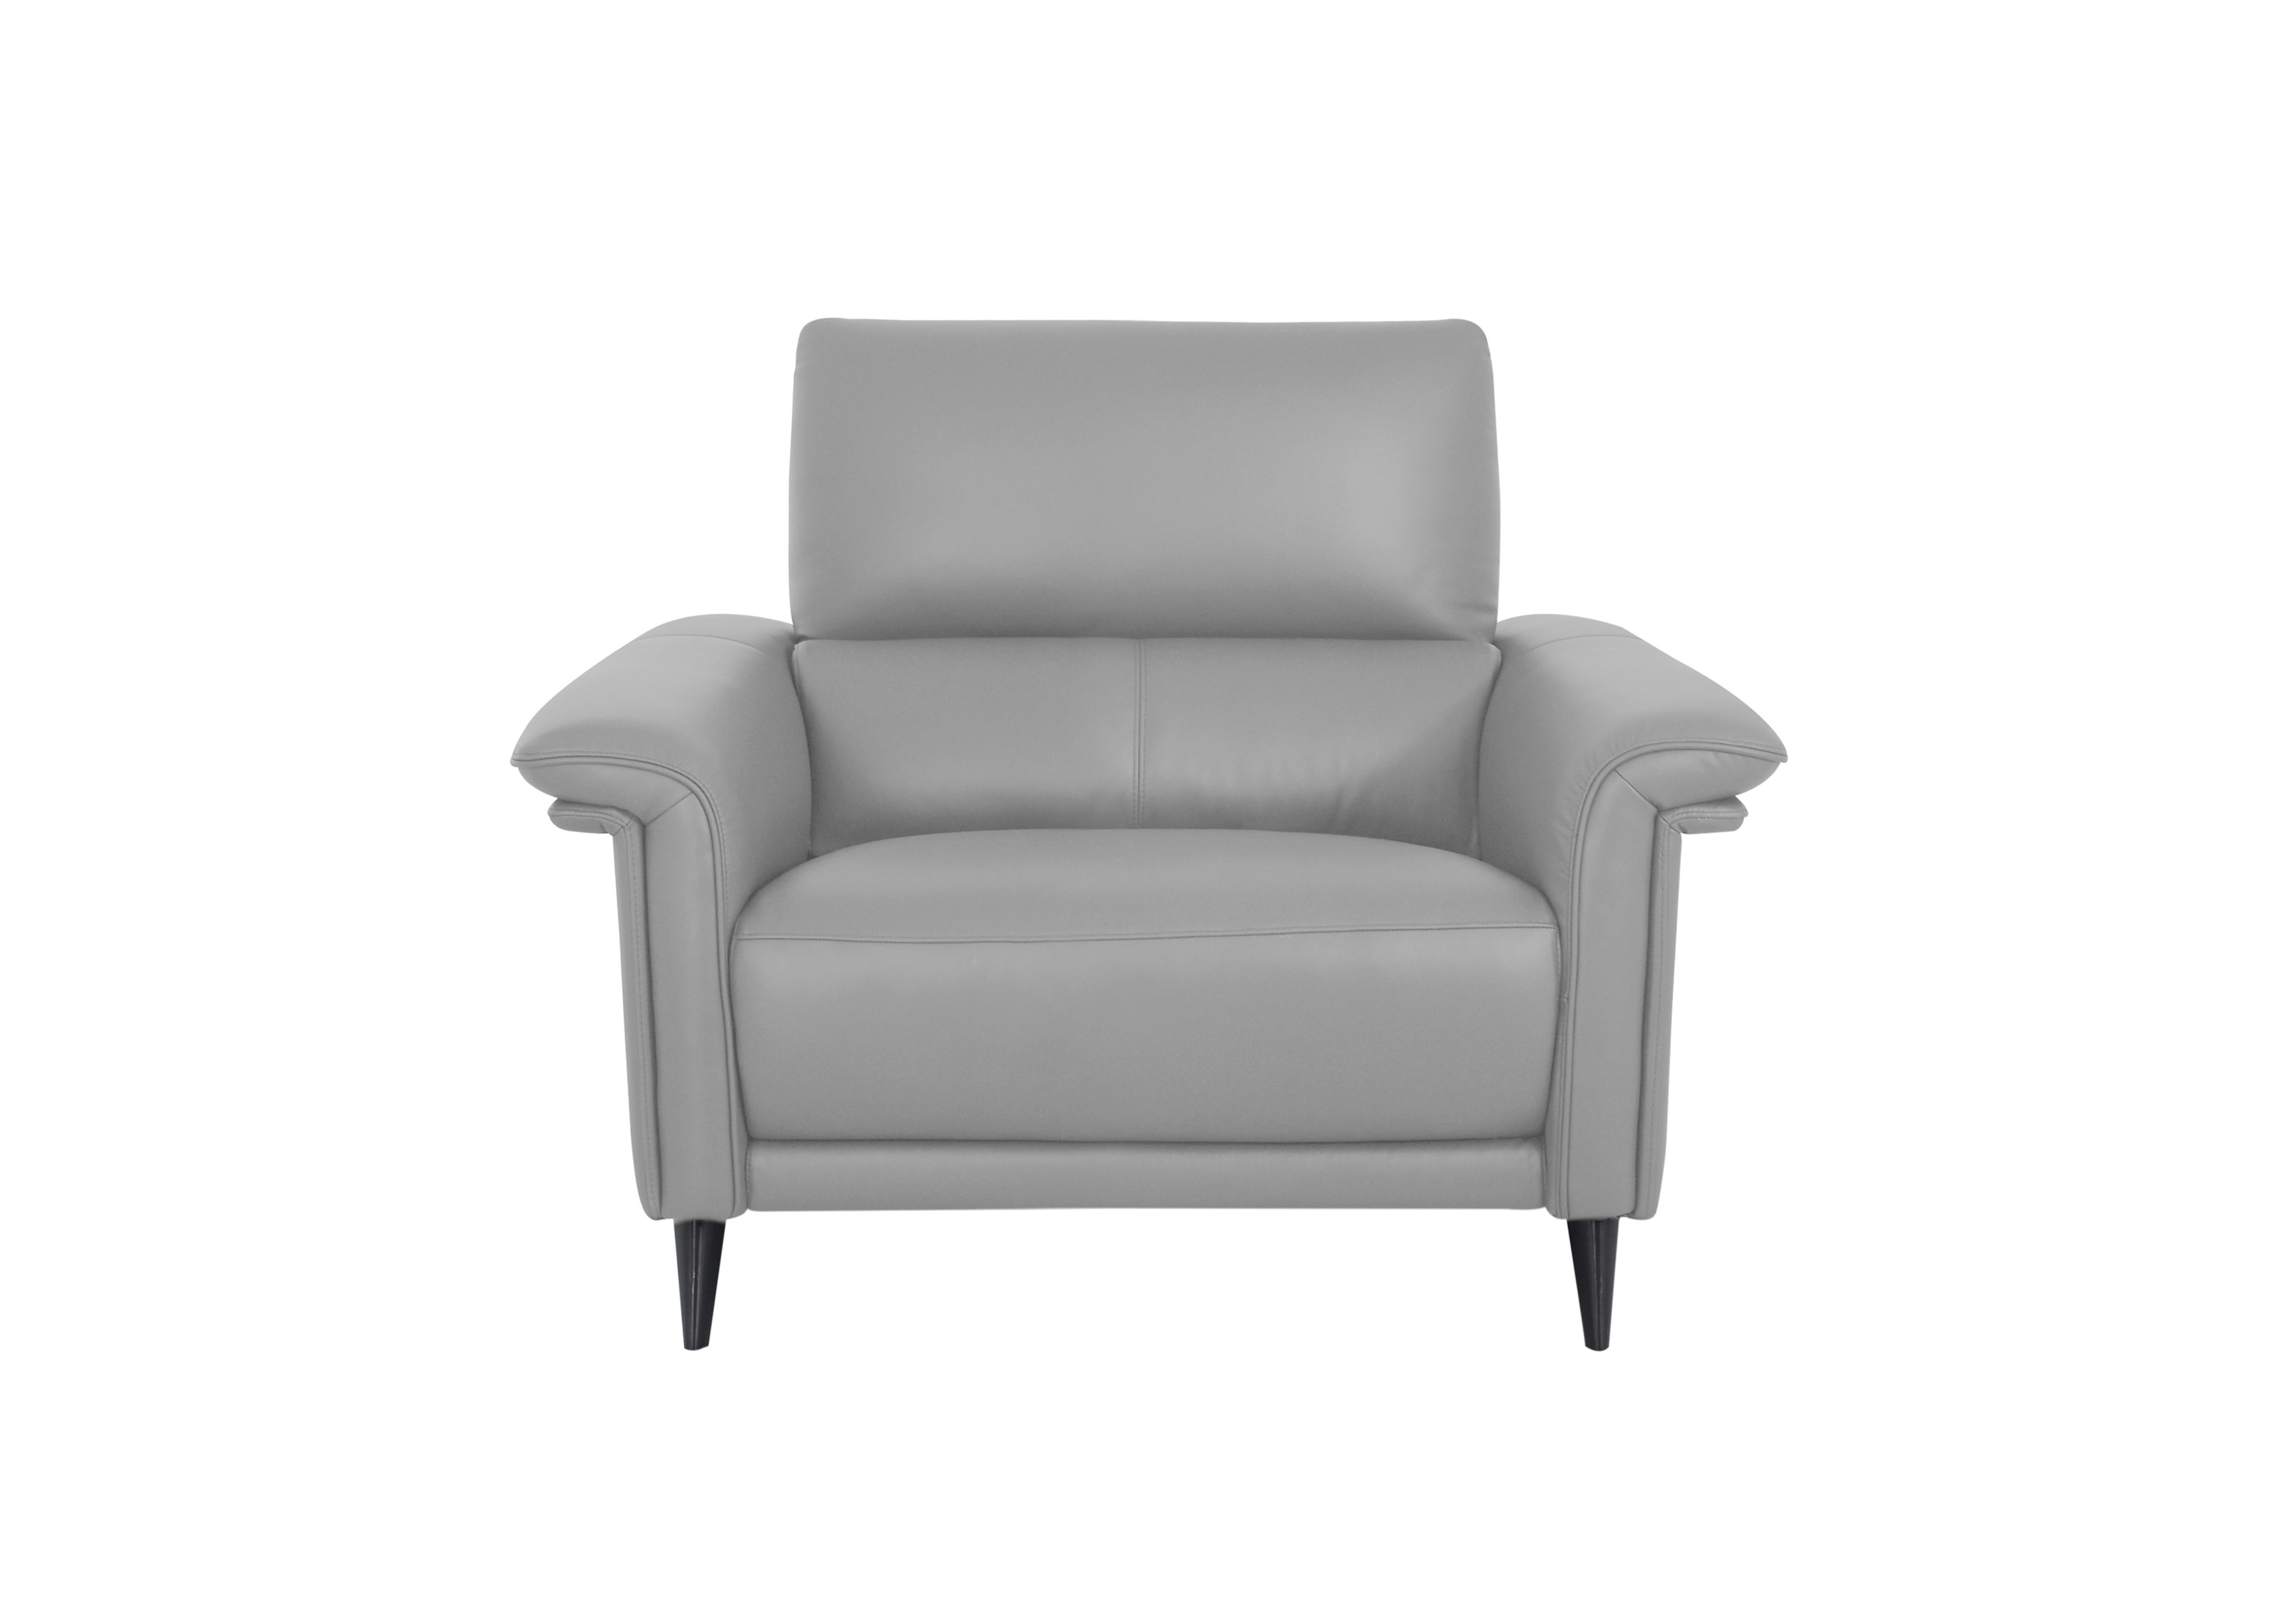 Huxley Leather Chair in Nn-516e Light Grey on Furniture Village